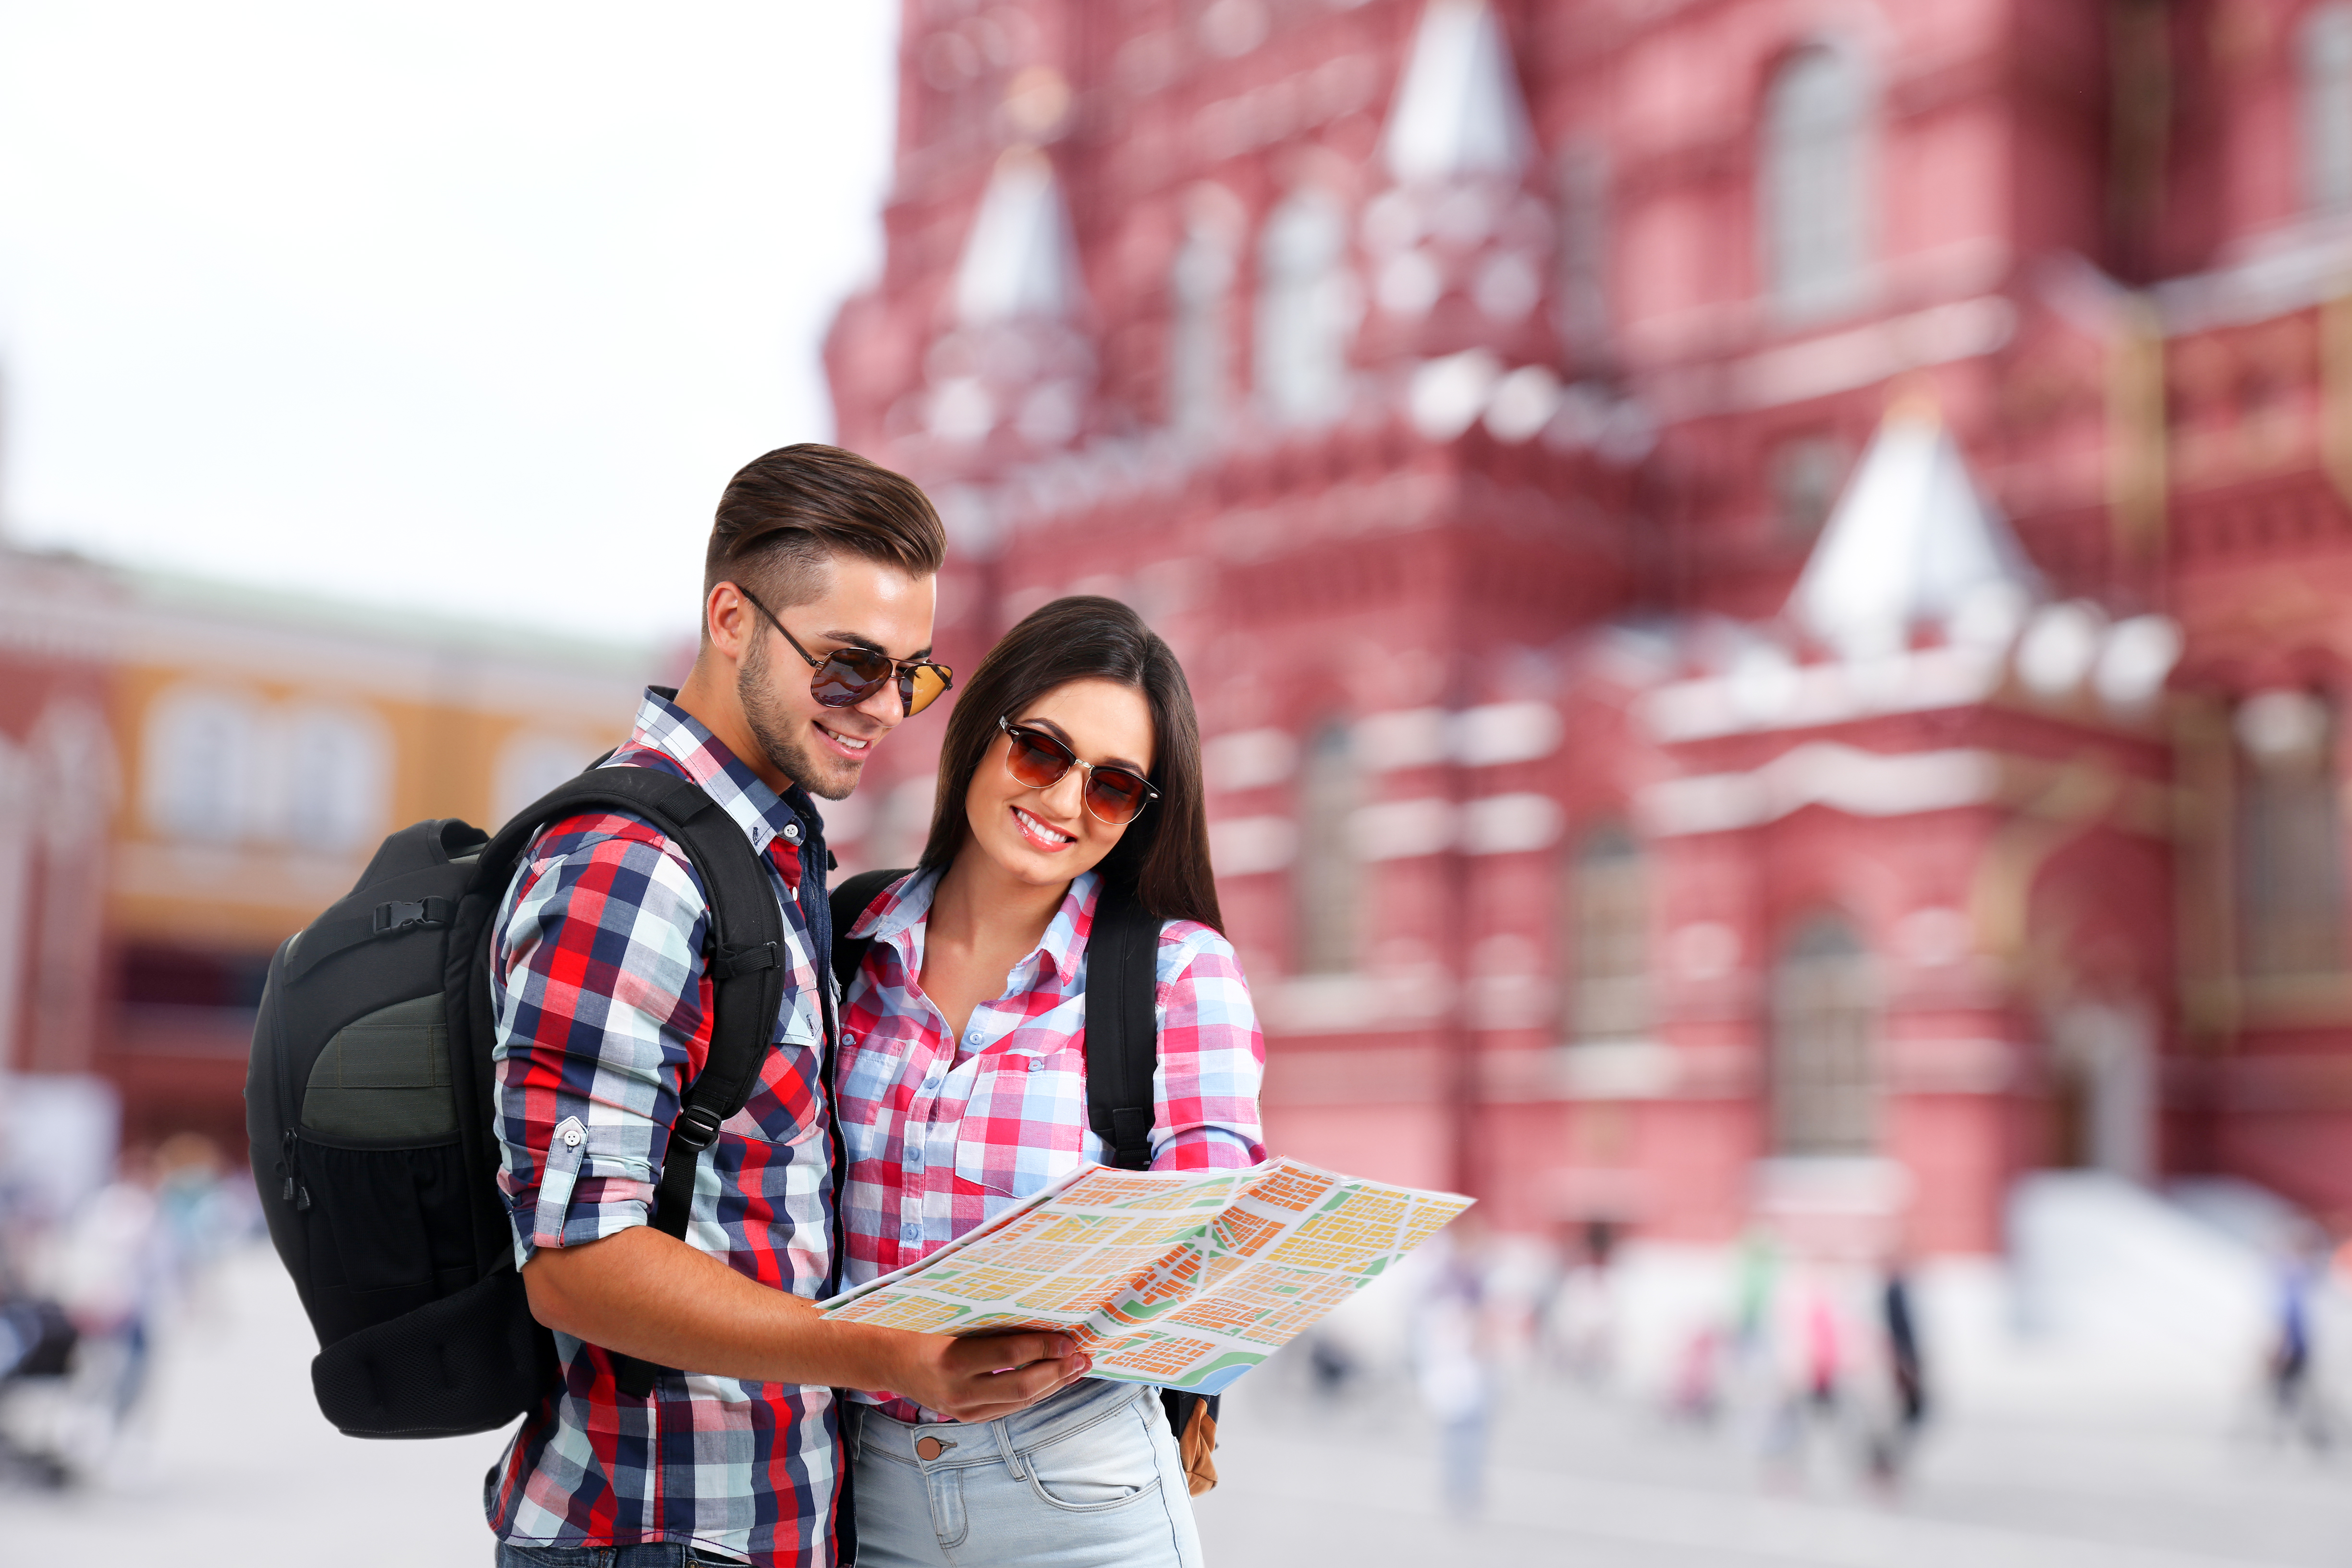 Why people travel in russia